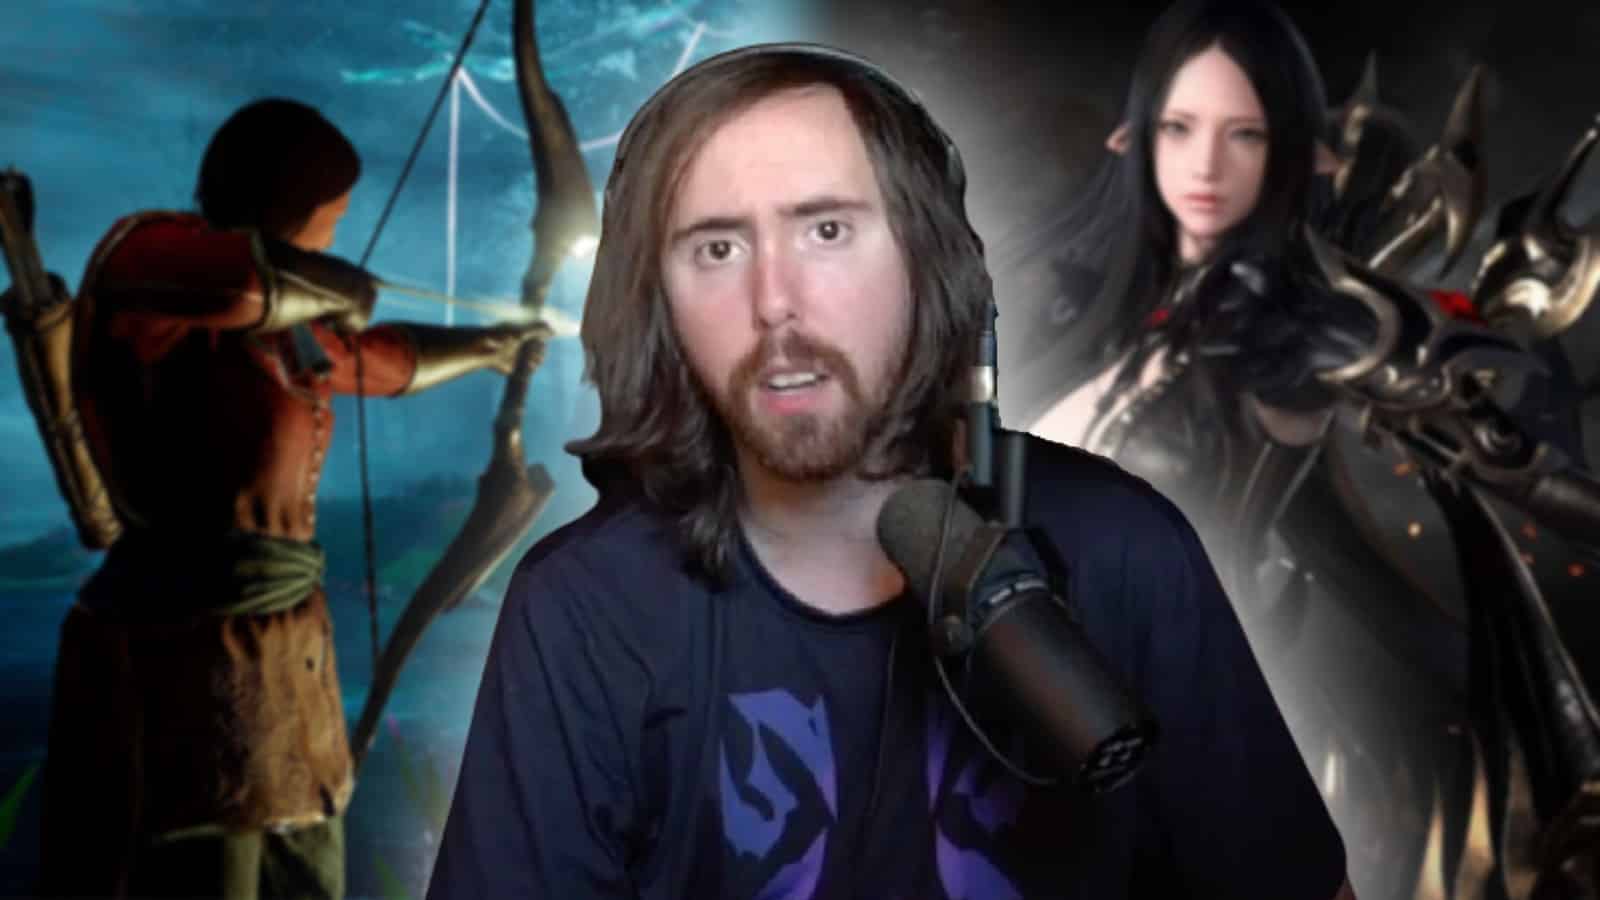 twitch streamer asmongold with new world and lost ark characters in the background